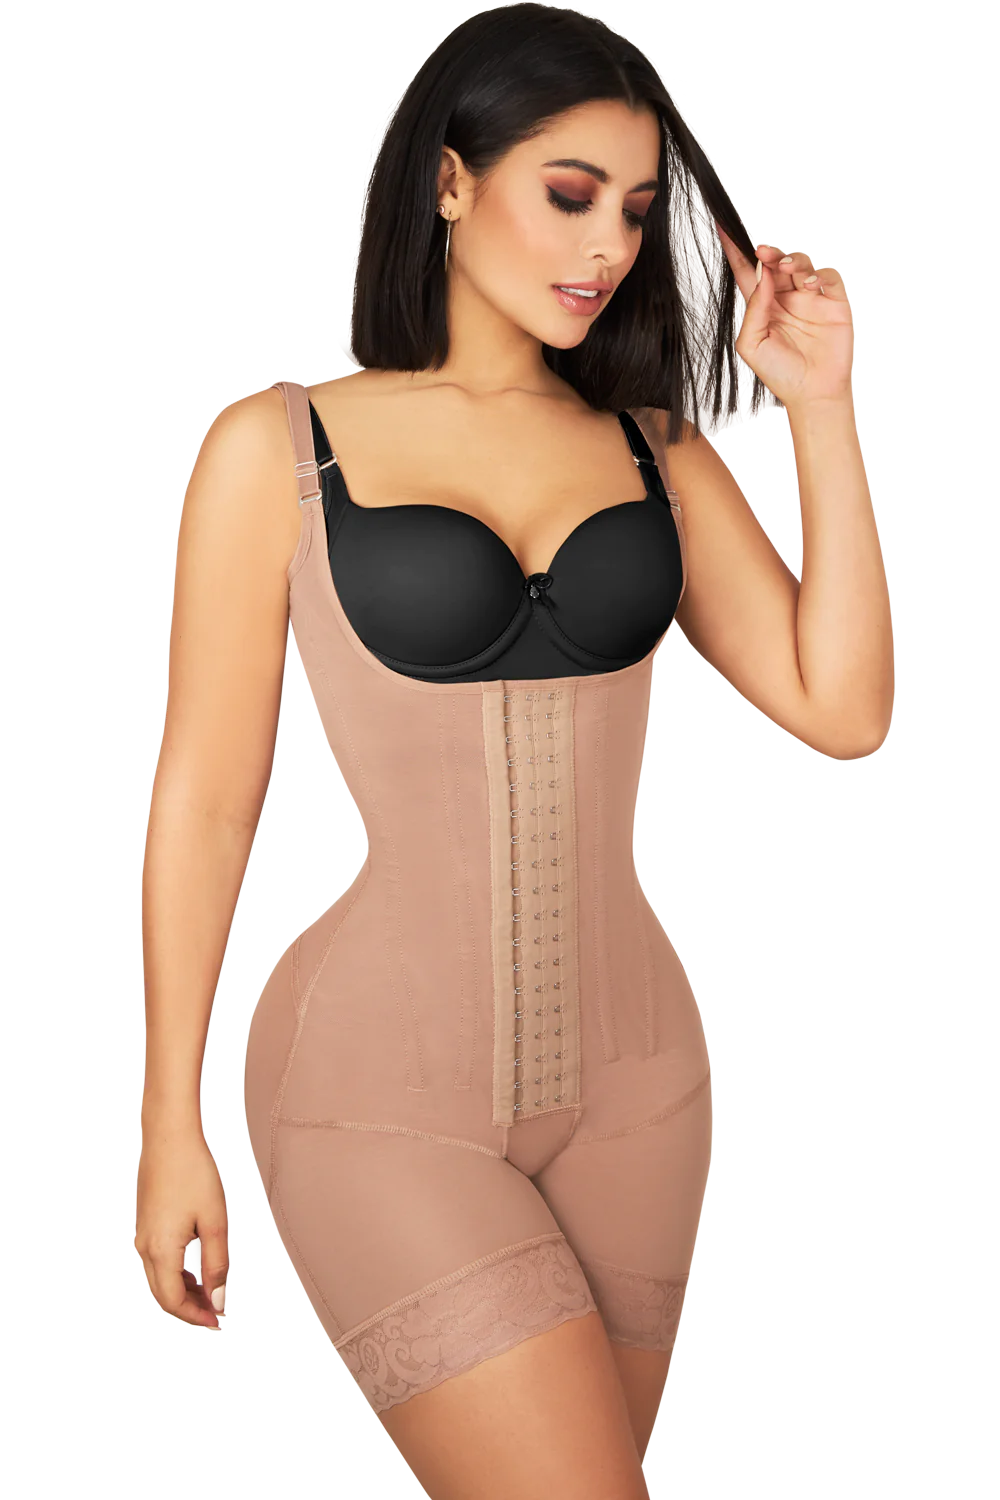 JACKIE LONDON 2880 - Hourglass body shaper with bones – Lush Boutique